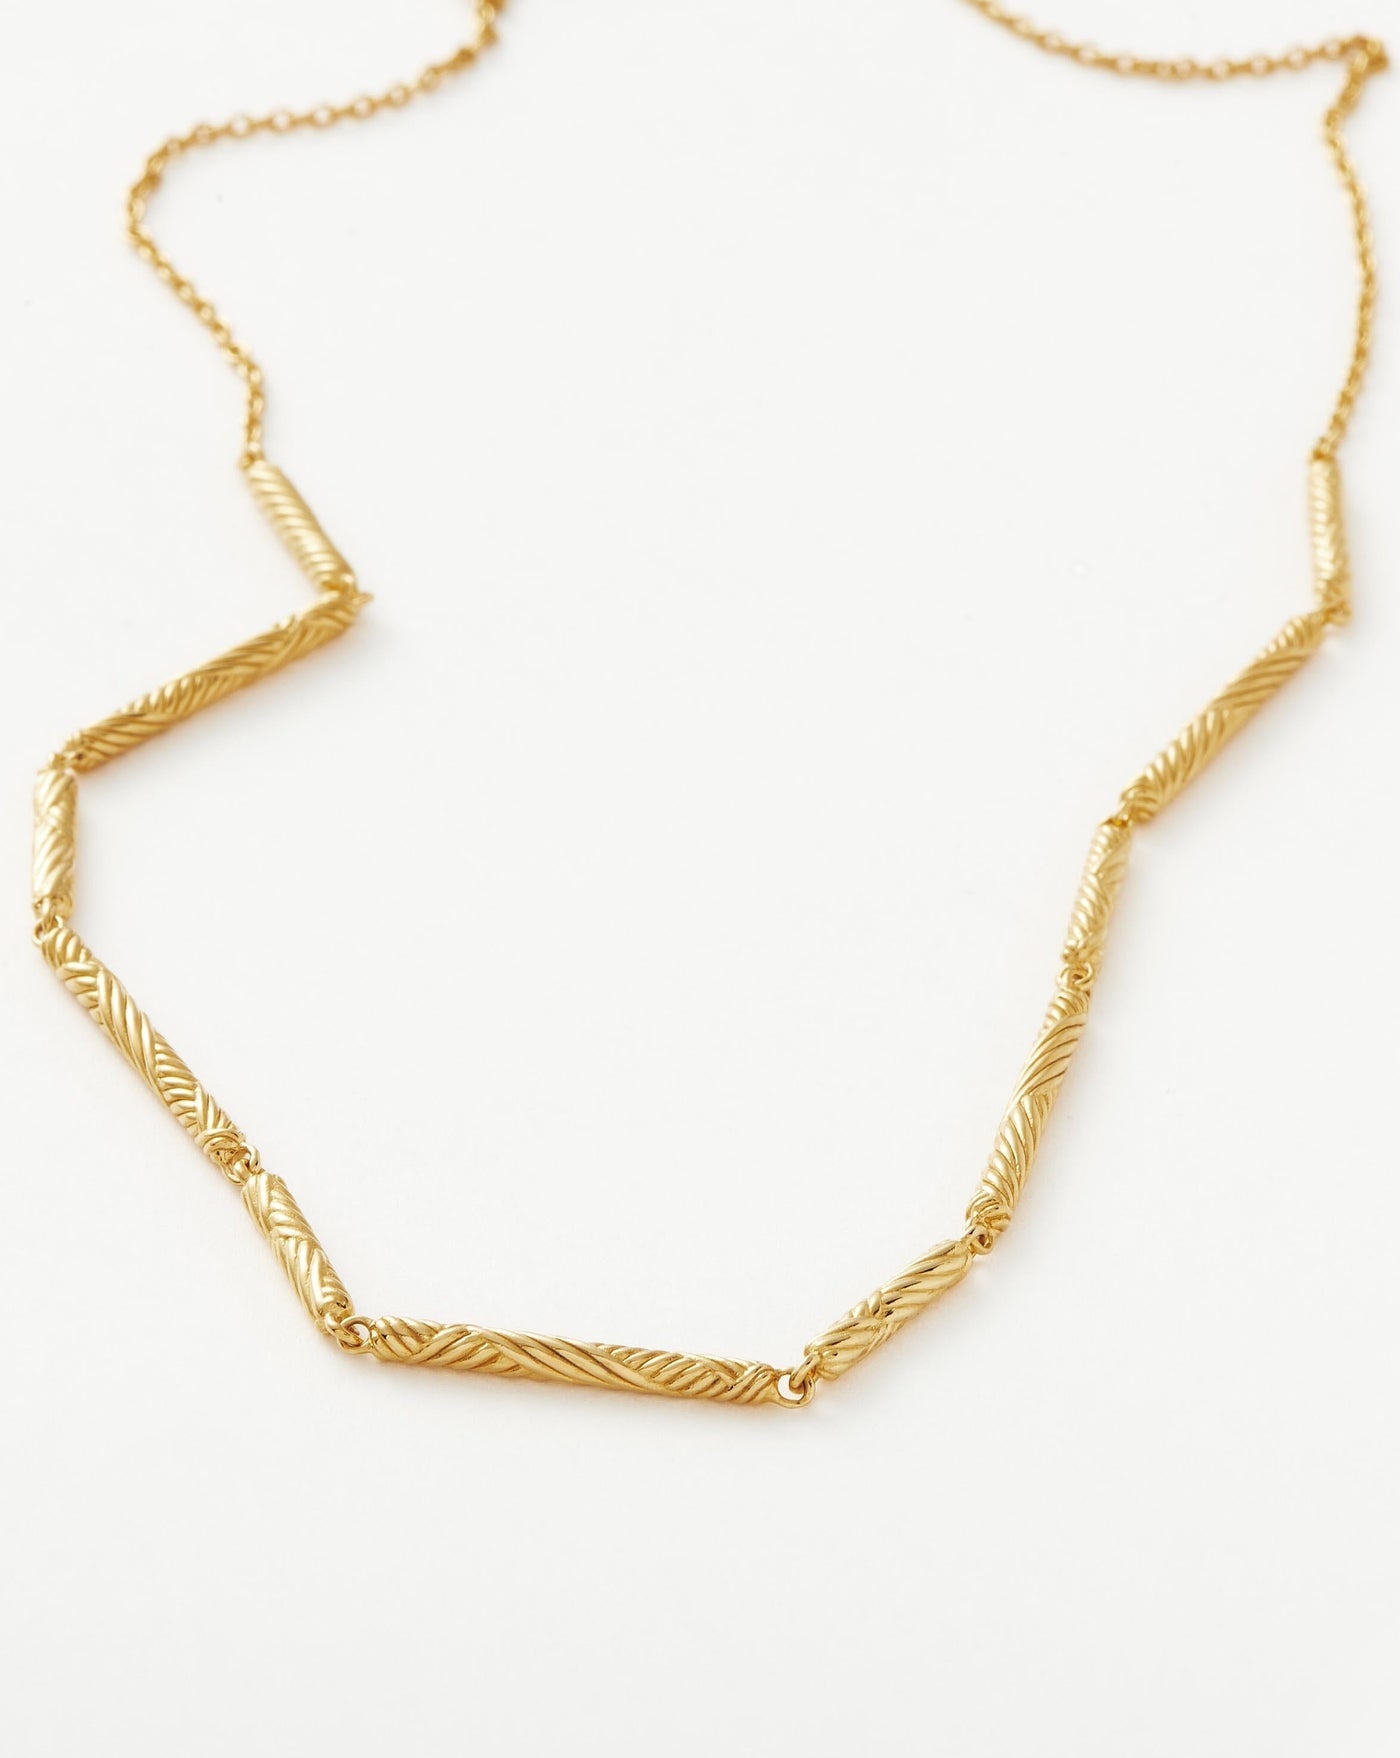 The Missoma Wavy Tube Choker Necklace in Gold available at The New Trend Australia